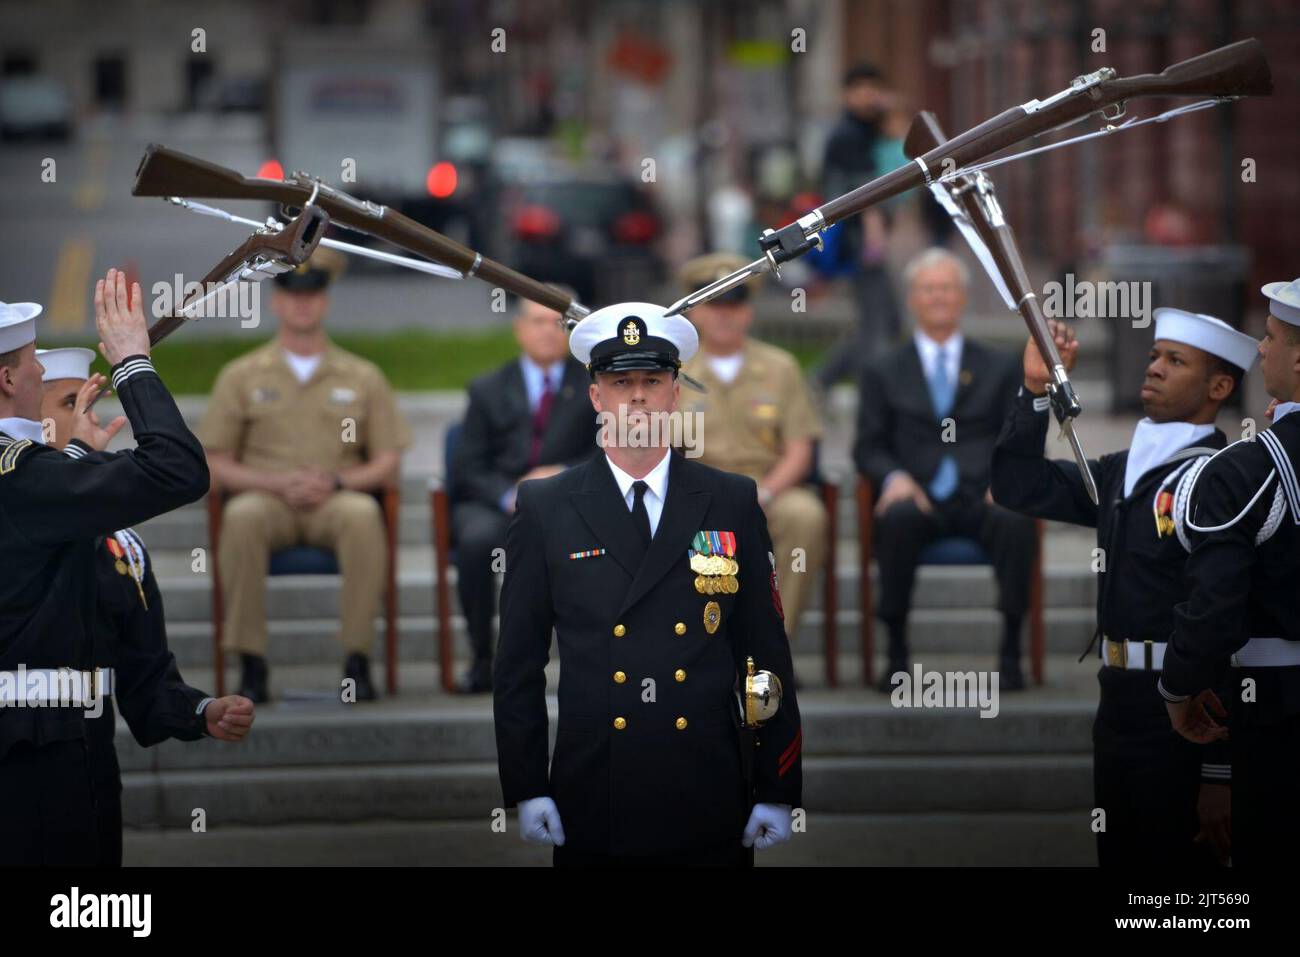 U.S. Navy chief petty officers celebrate 120 years of the chief petty officer rank during a ceremony April 1, 2013, at the U.S. Navy Memorial in Washington, D.C.. Stock Photo